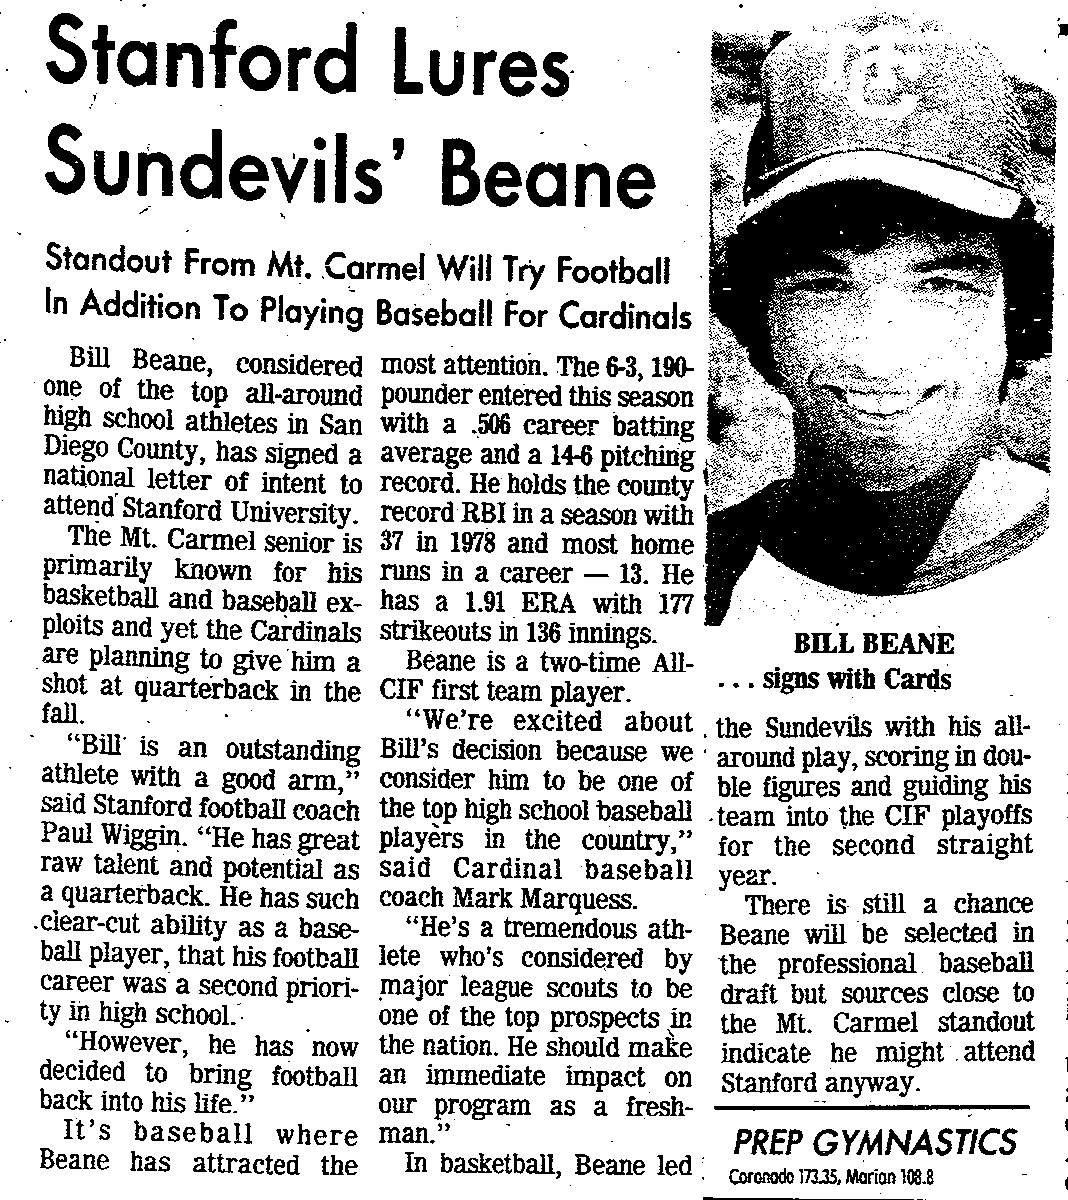 On this date in 1980, Billy Beane 'decided to bring football back into his life.'